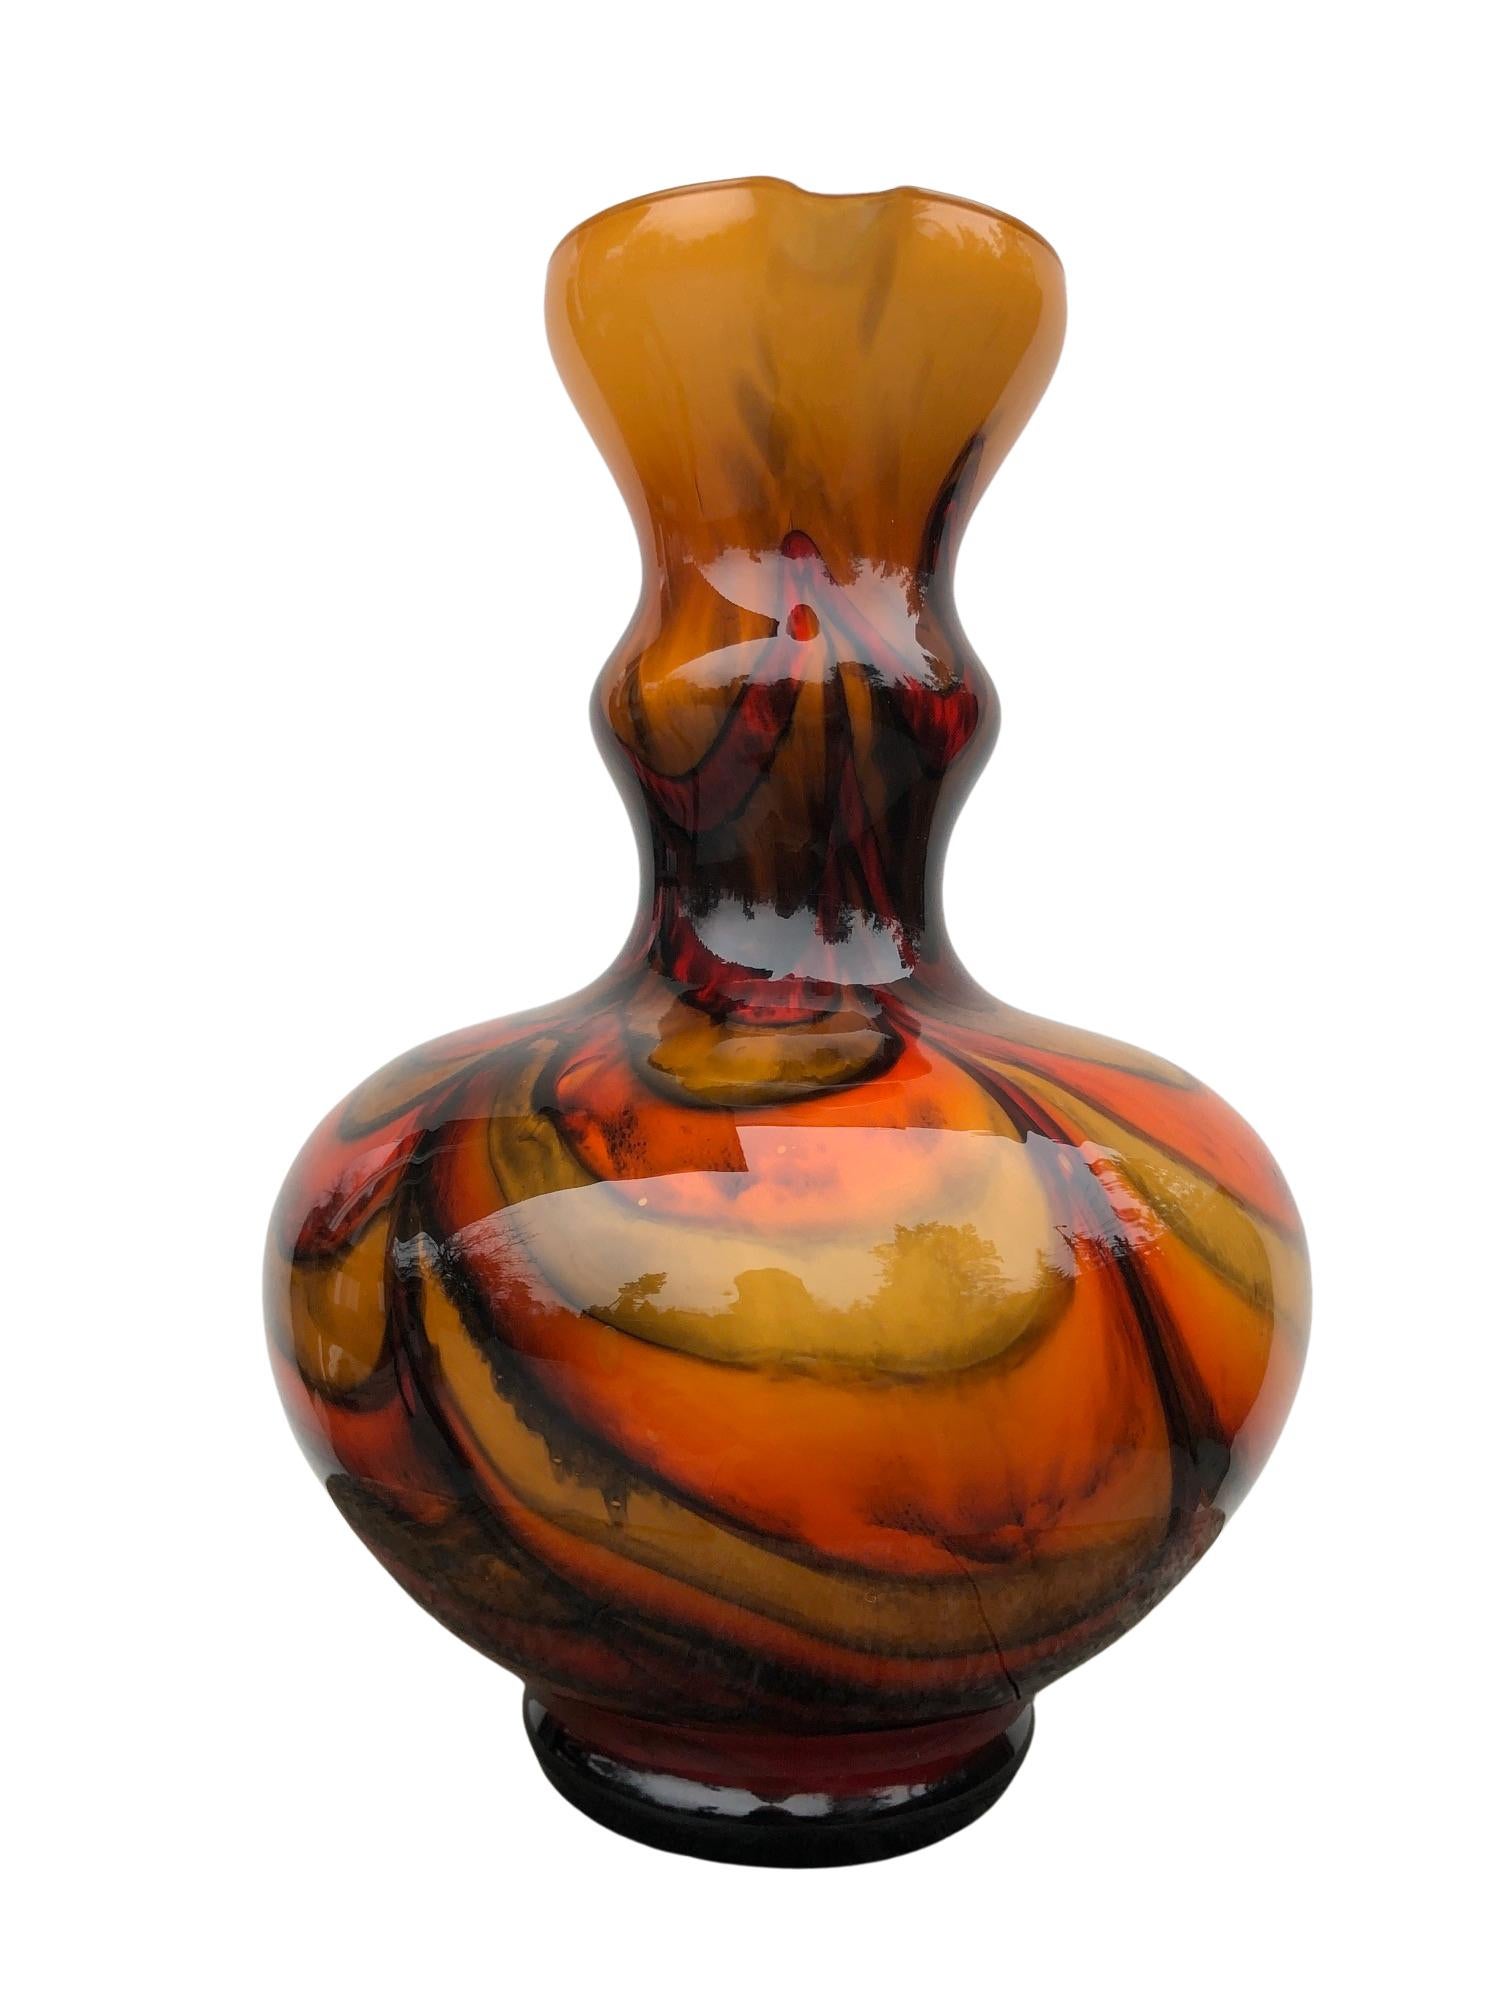 Beautiful Italian vase from VB Opaline Florence. 

Vivid orange, red and yellow colors.

Made of hand-formed glass.

Preserved in very good condition without any damage.